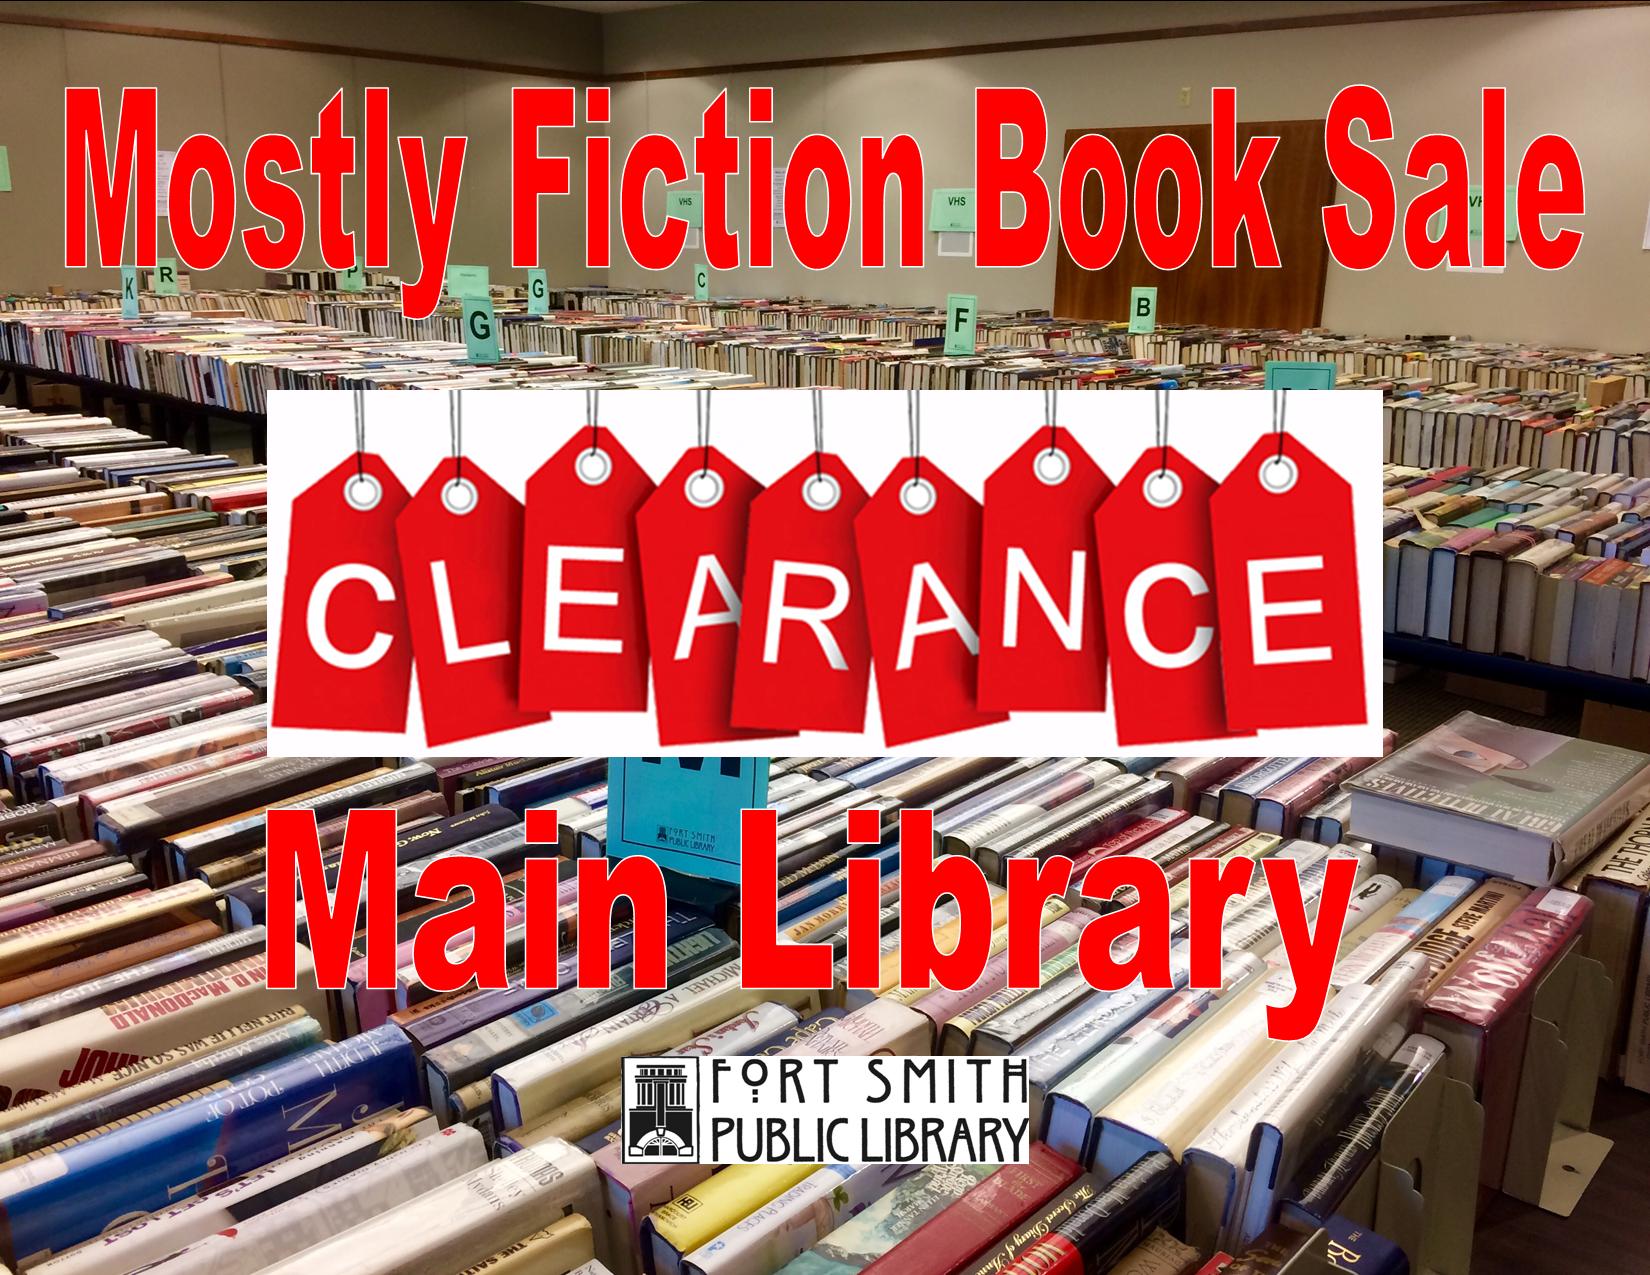 Friends of the Library Non-Fiction Used Book Sale-Clearance